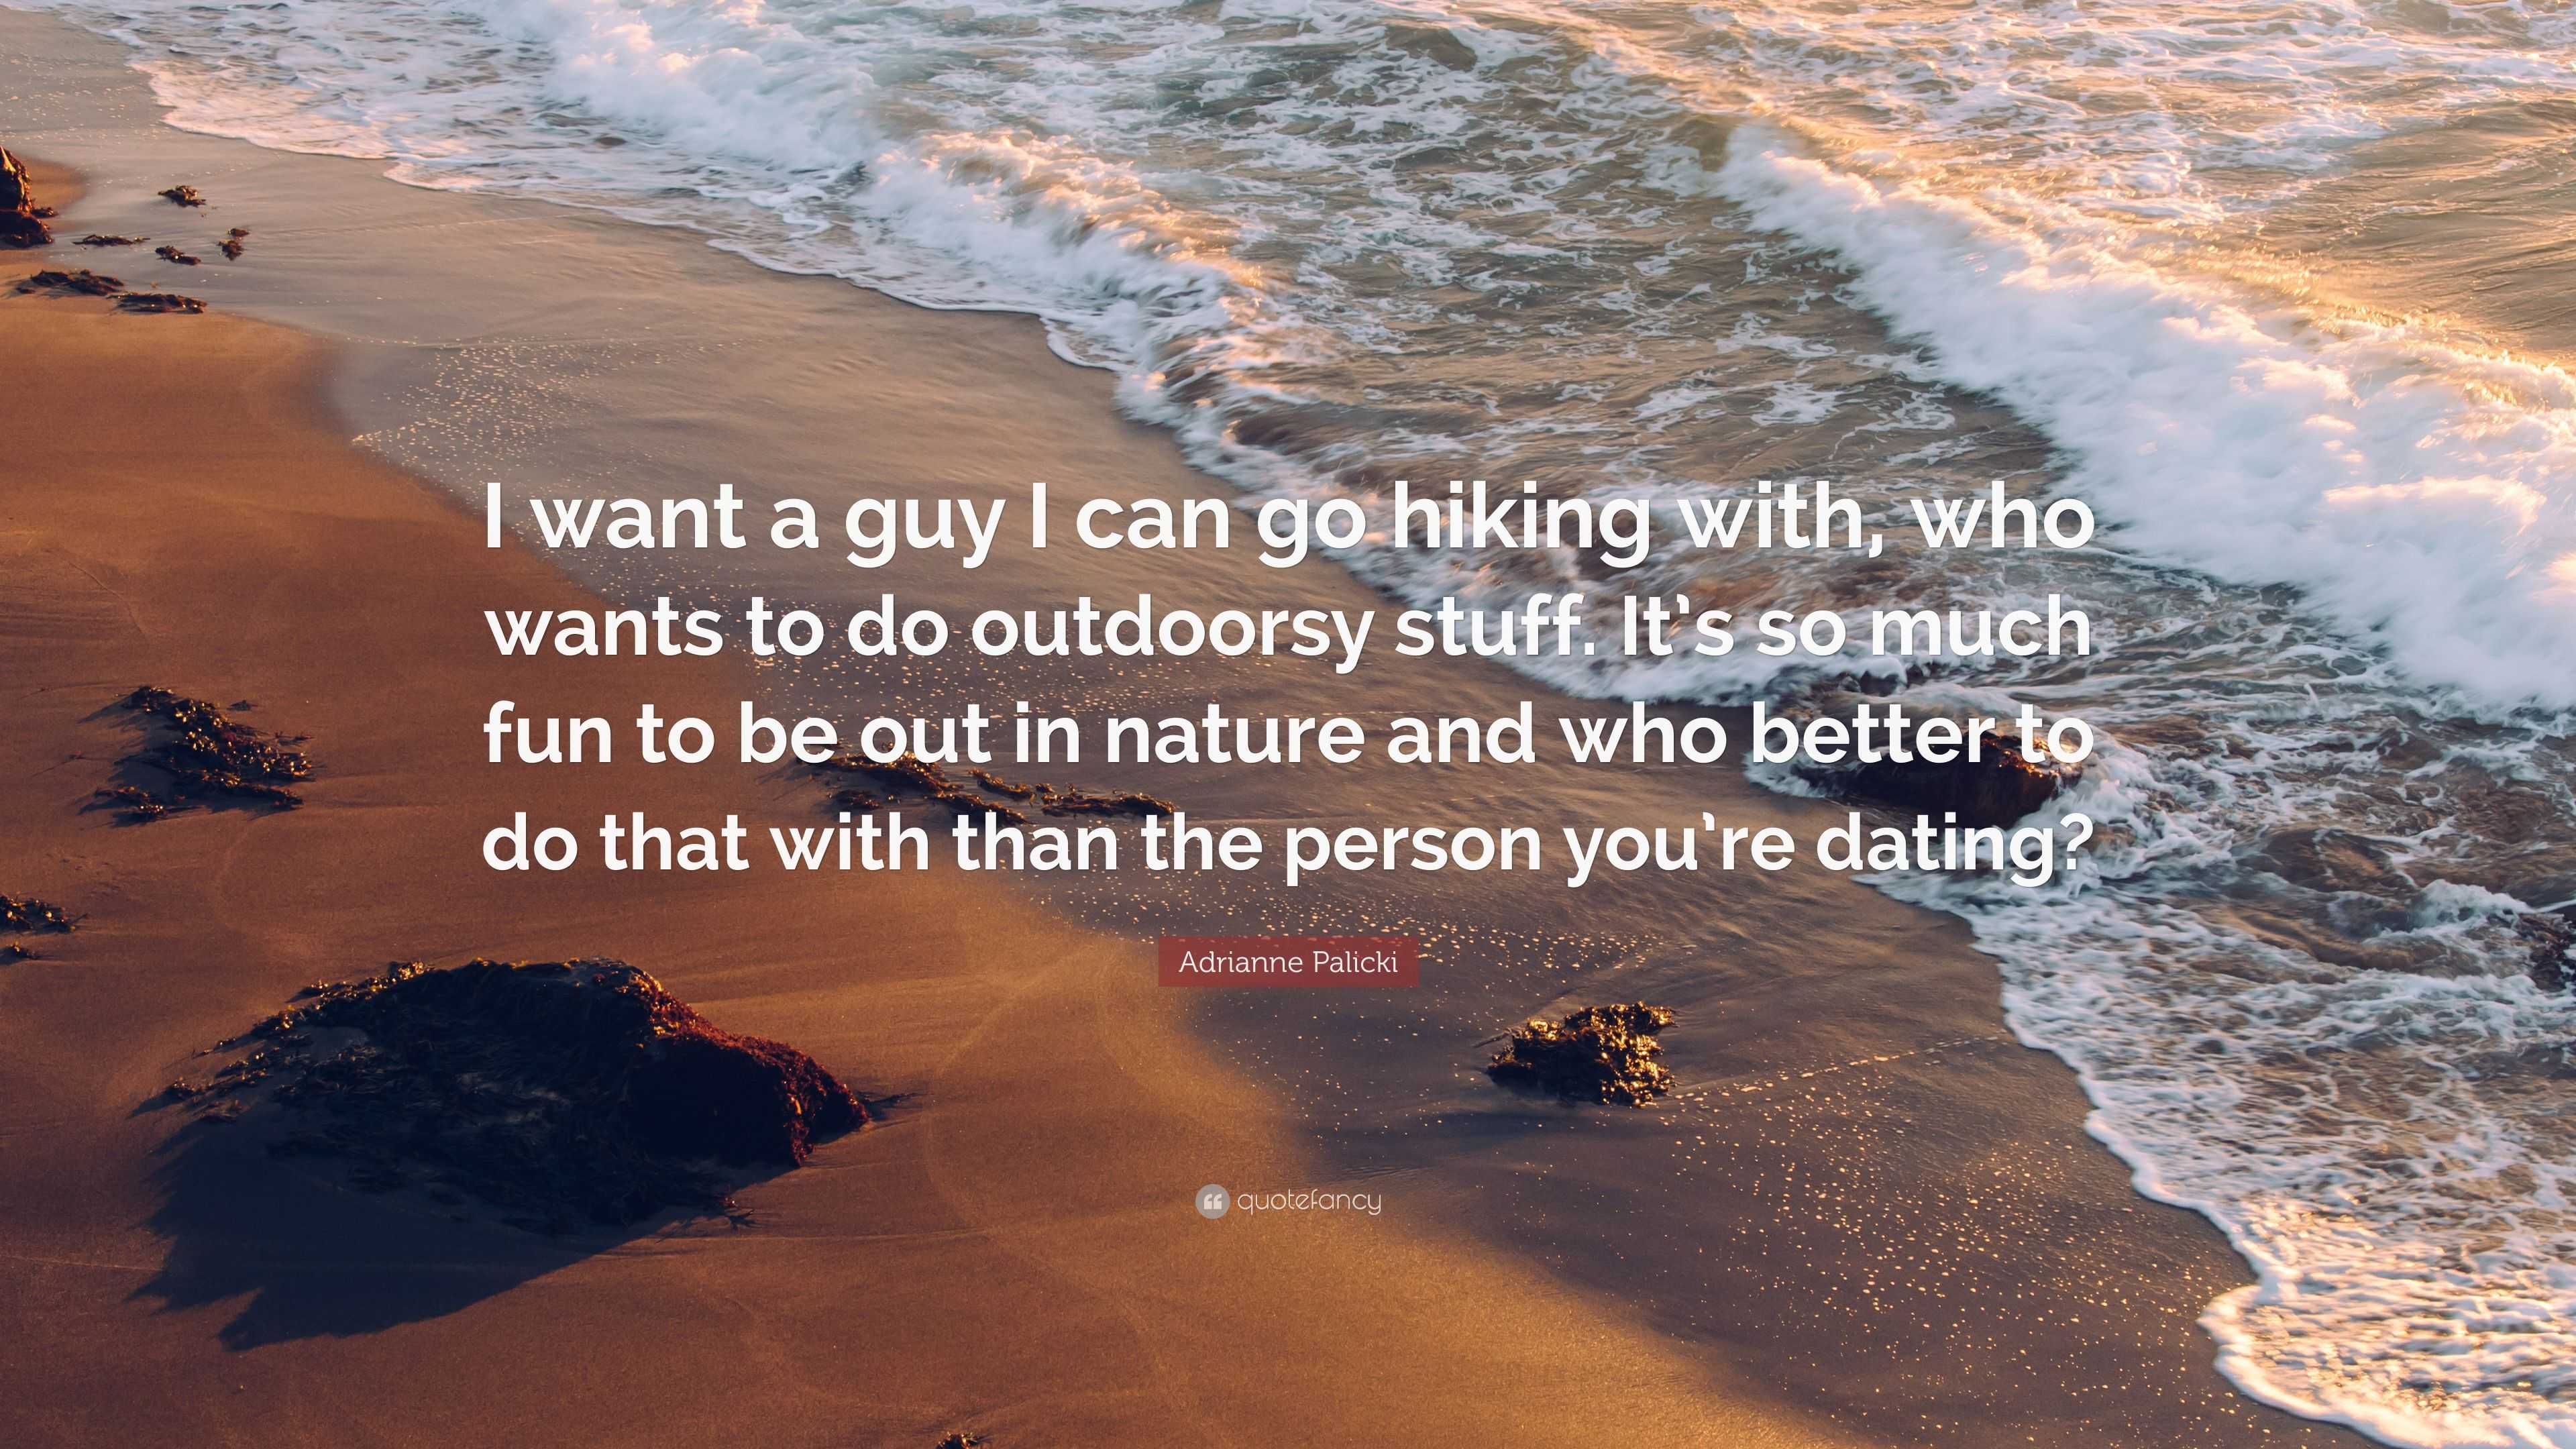 Outdoorsy guys dating